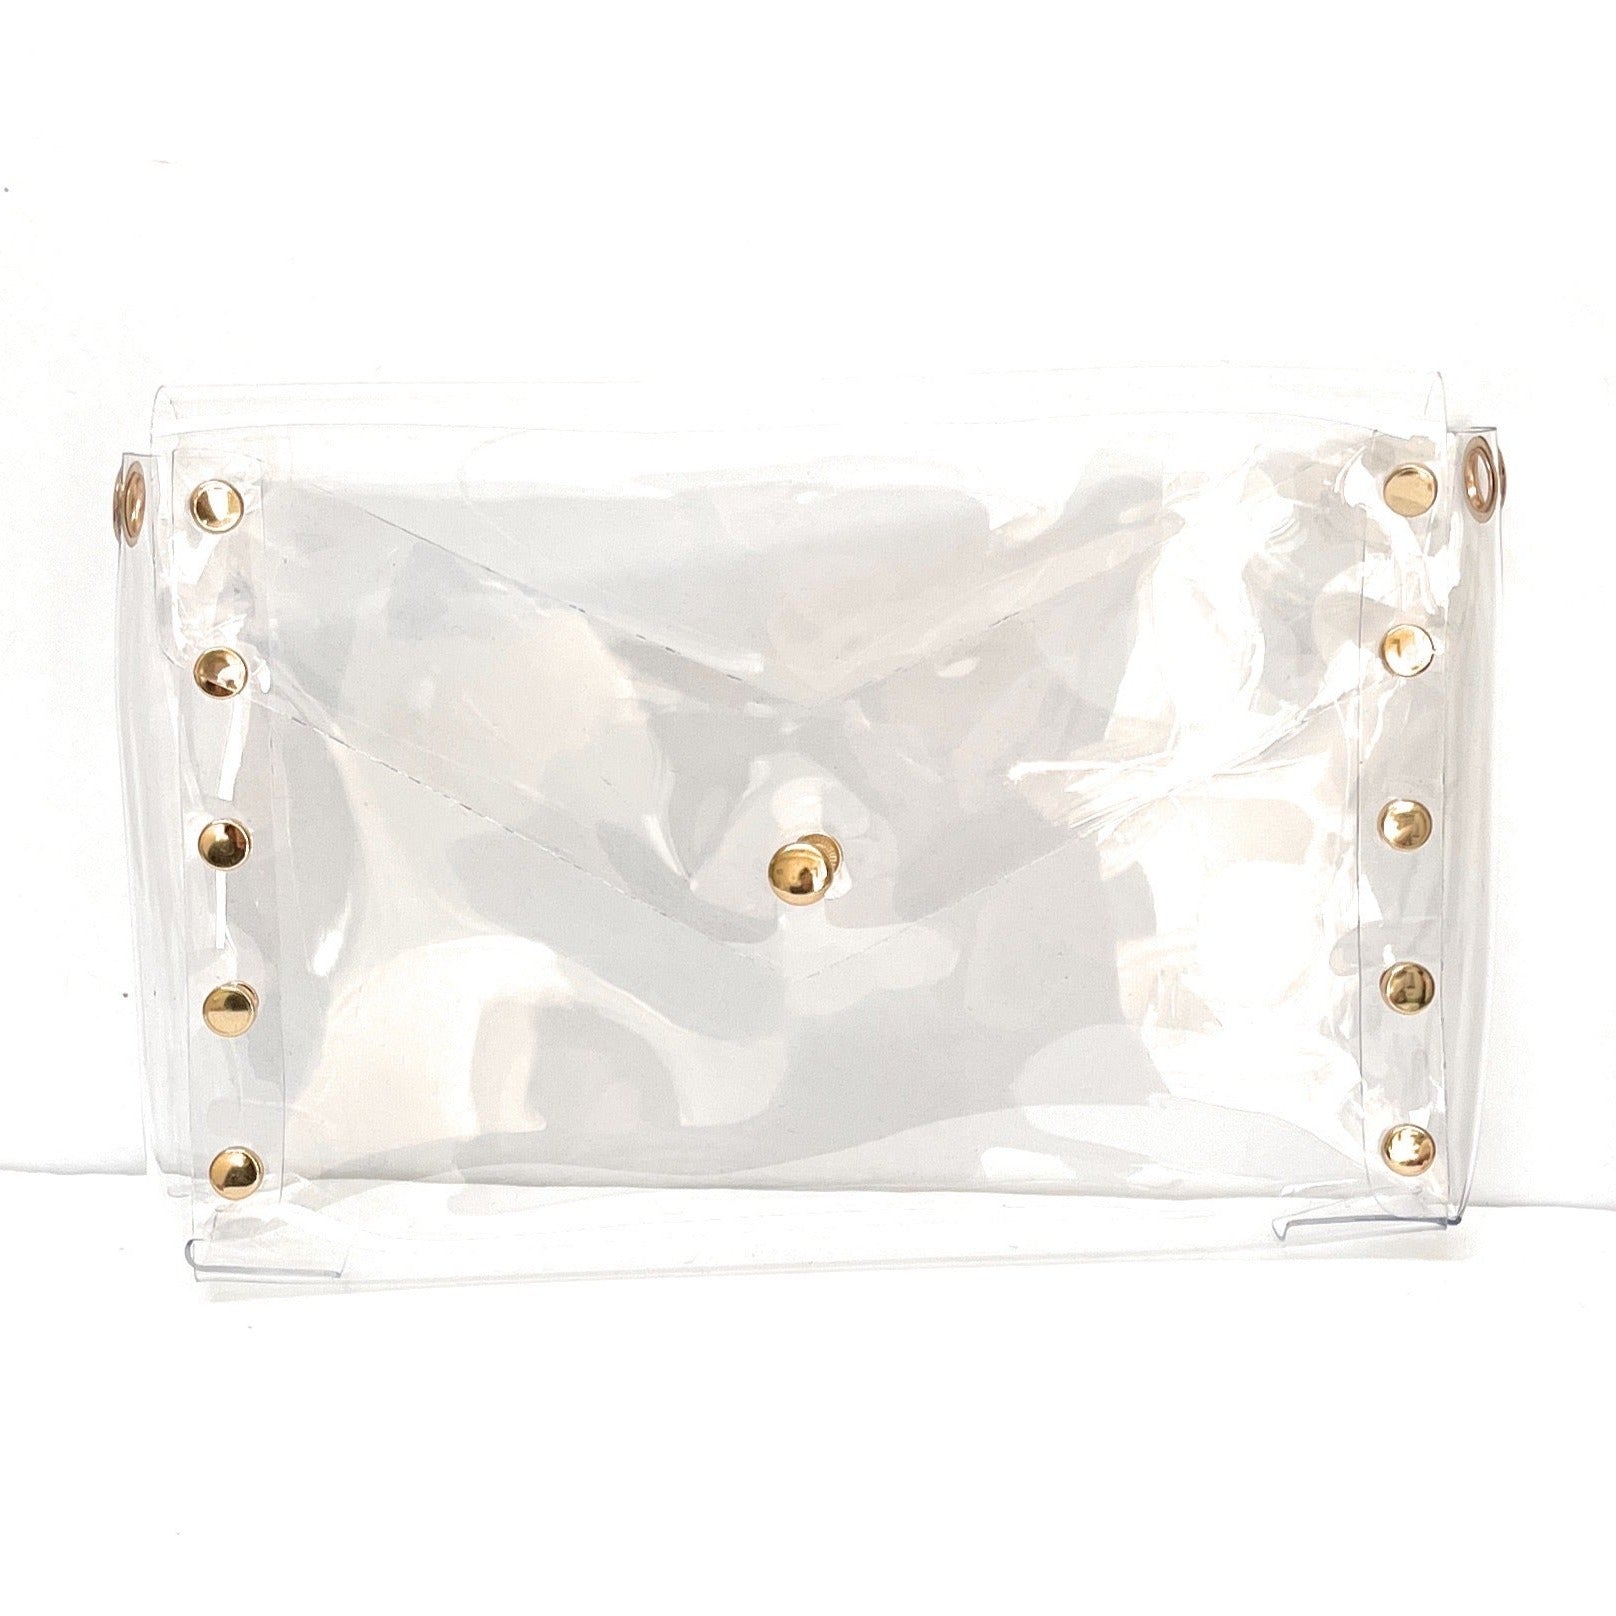 YueBags Small Clear Purse Stadium Approved for Women,Cute Clear Crossbody  Bag for Sports Event,Concert,Gameday